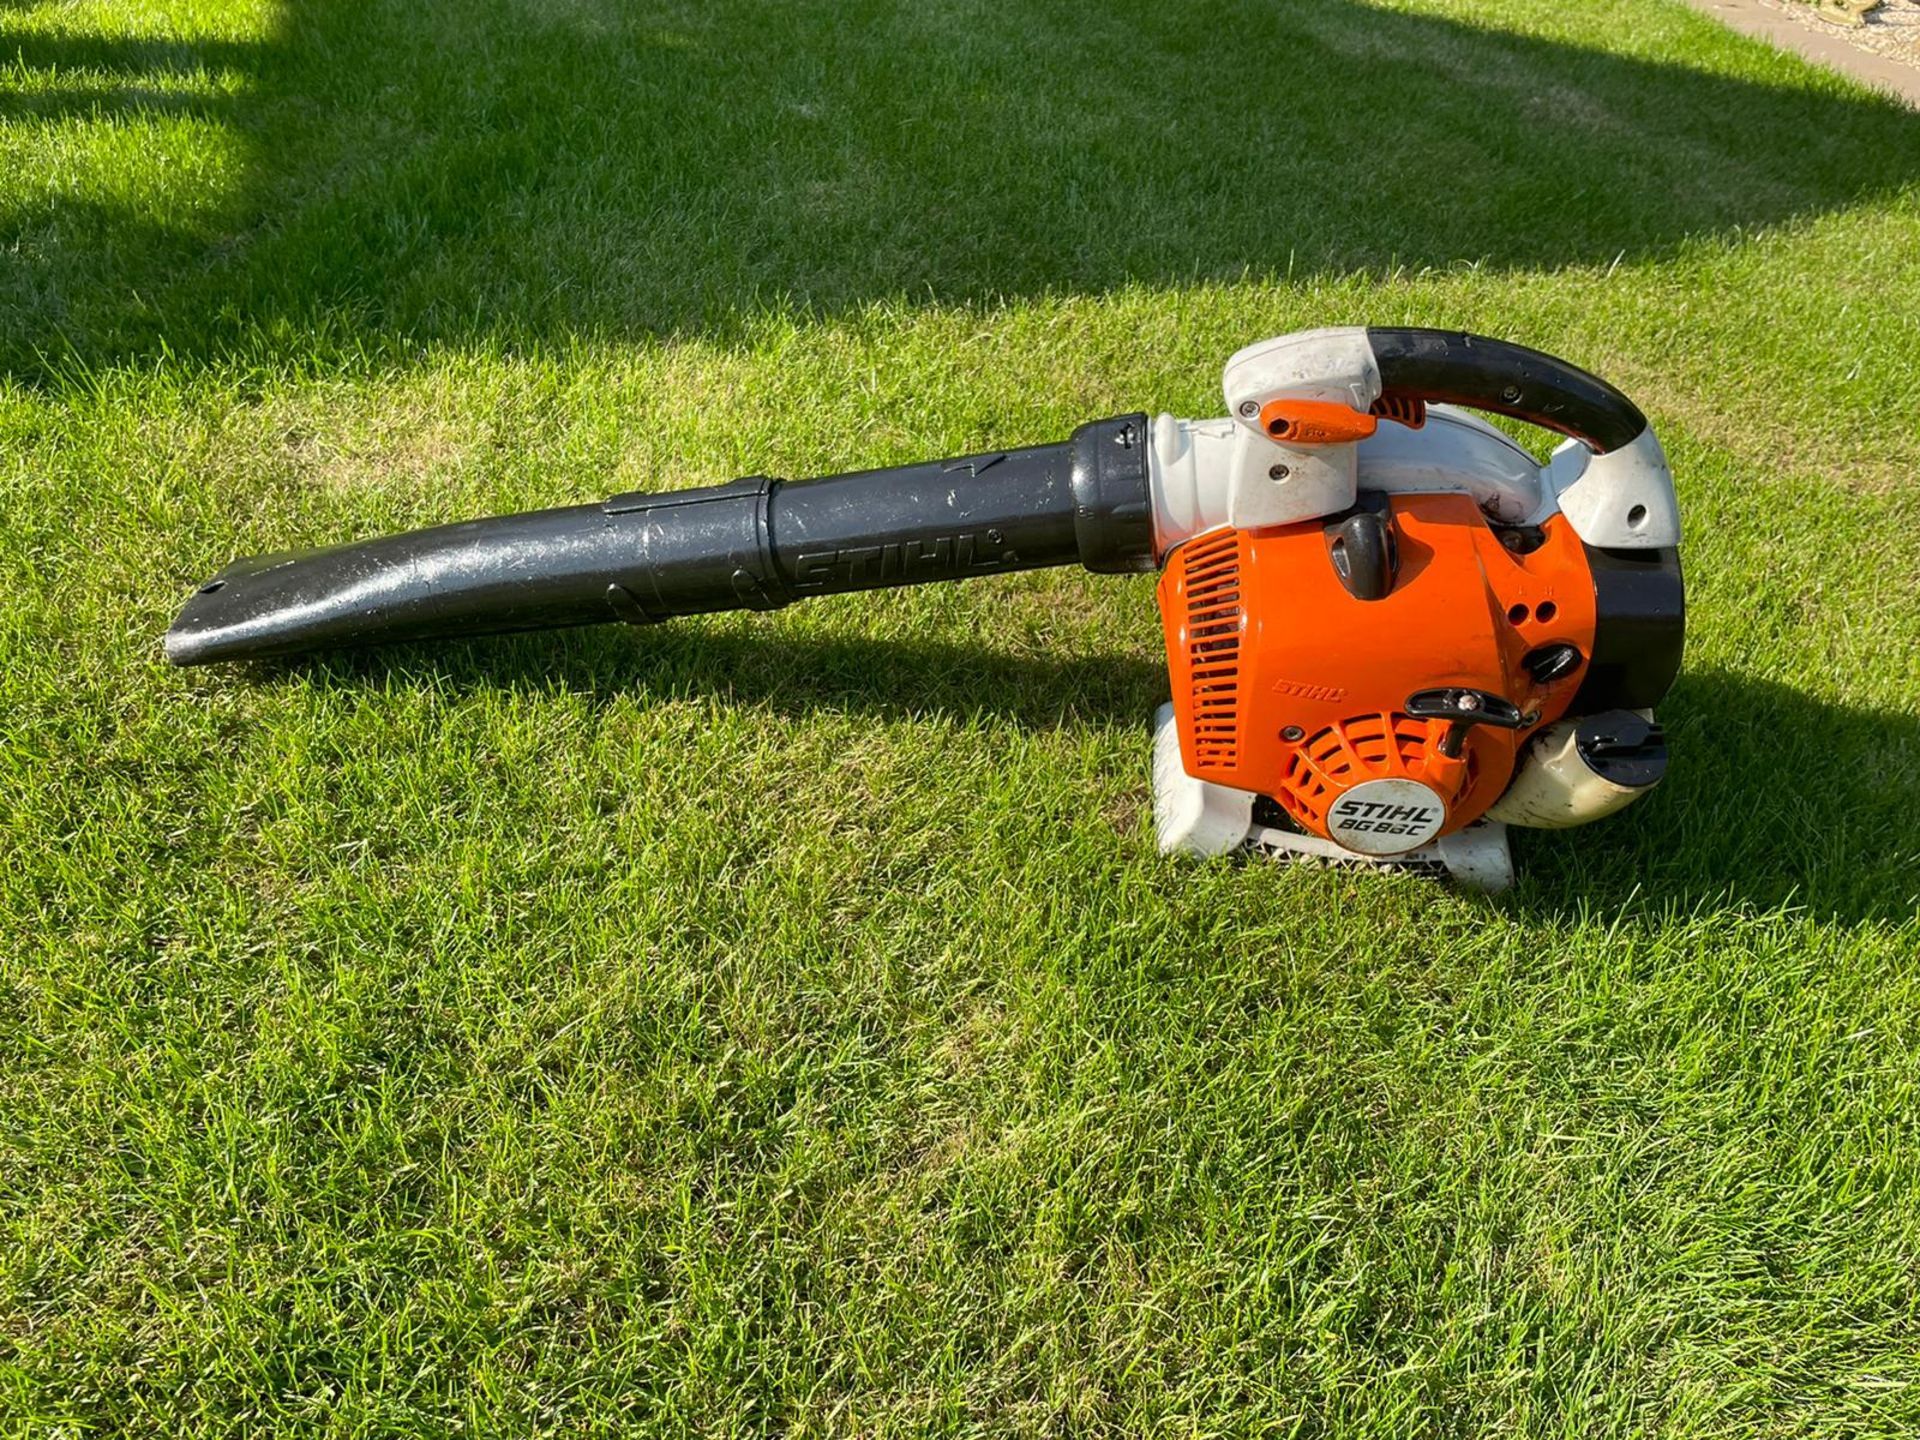 2019 STIHL BG86C-E LEAF BLOWER, RUNS AND WORKS, PIPES ARE INCLUDED *NO VAT* - Image 2 of 6